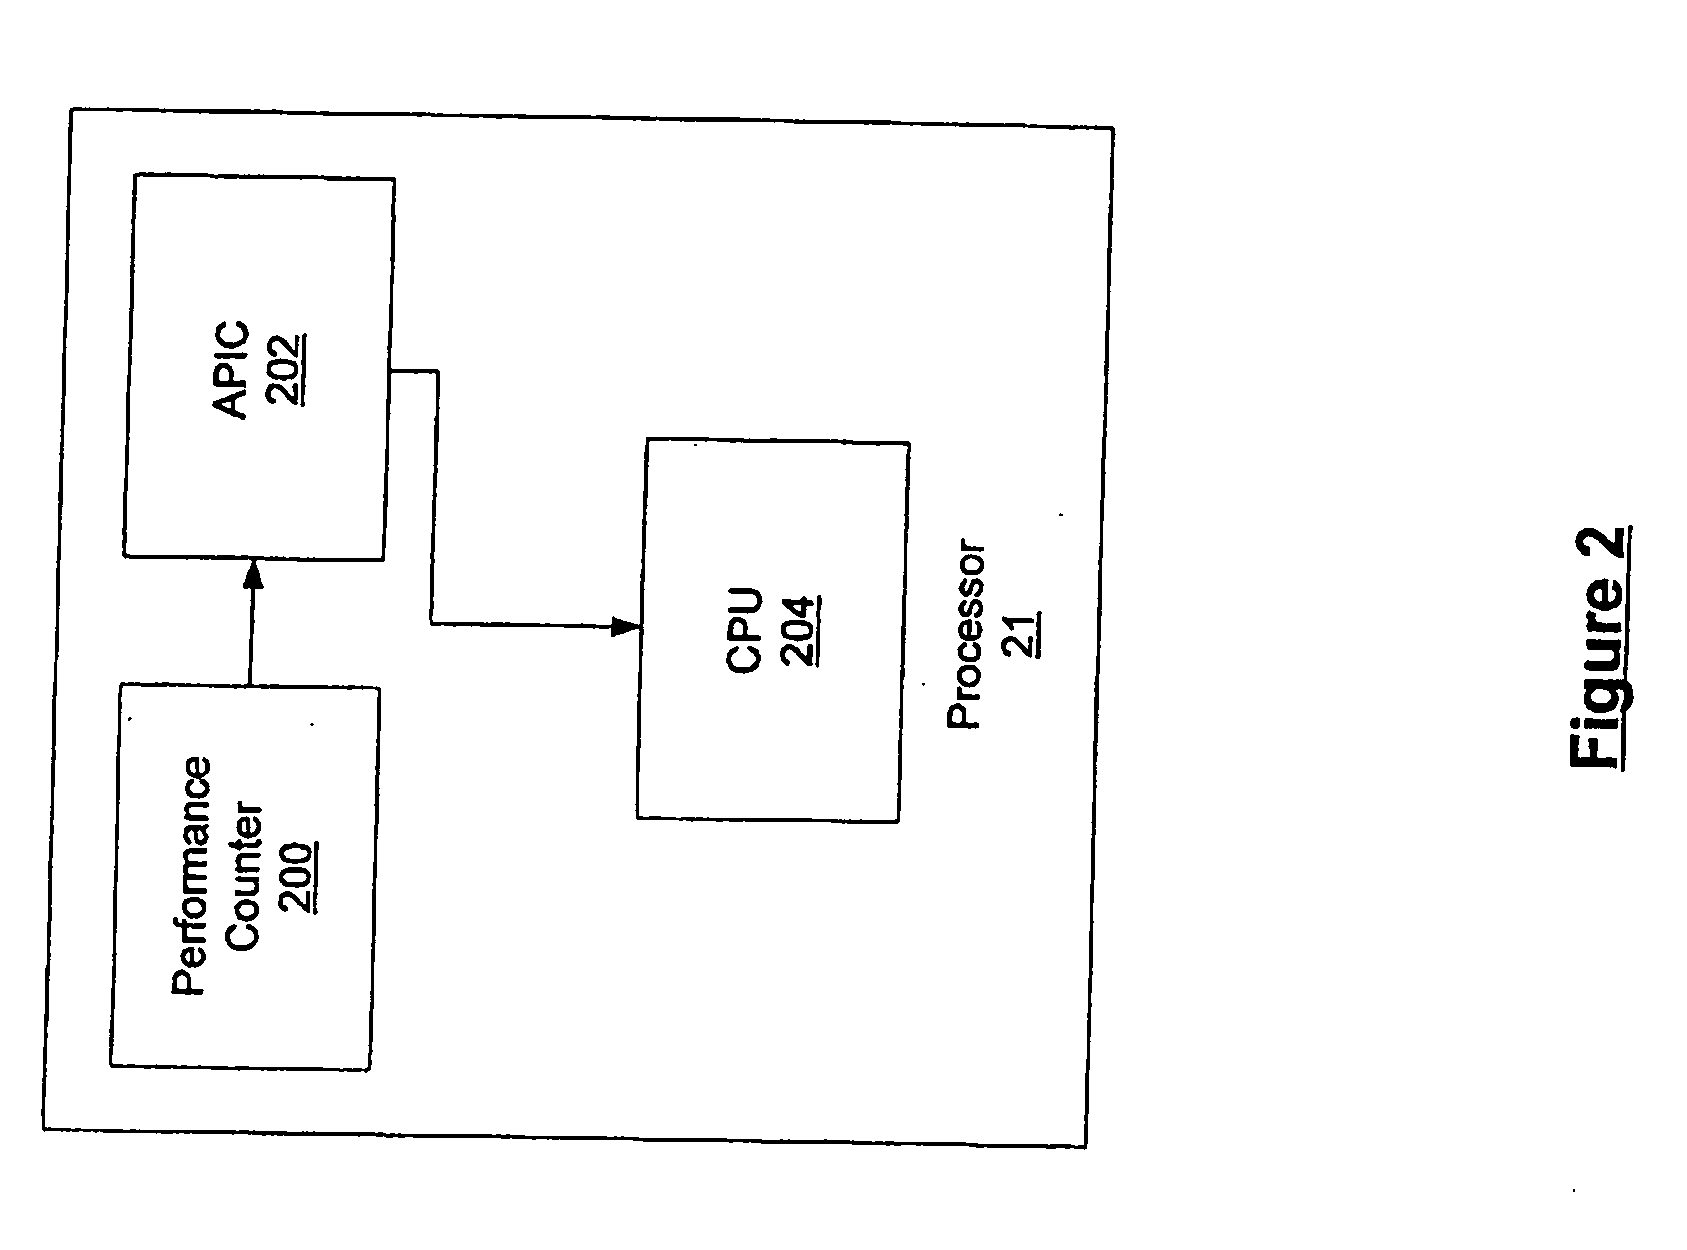 Method and system for real time scheduler